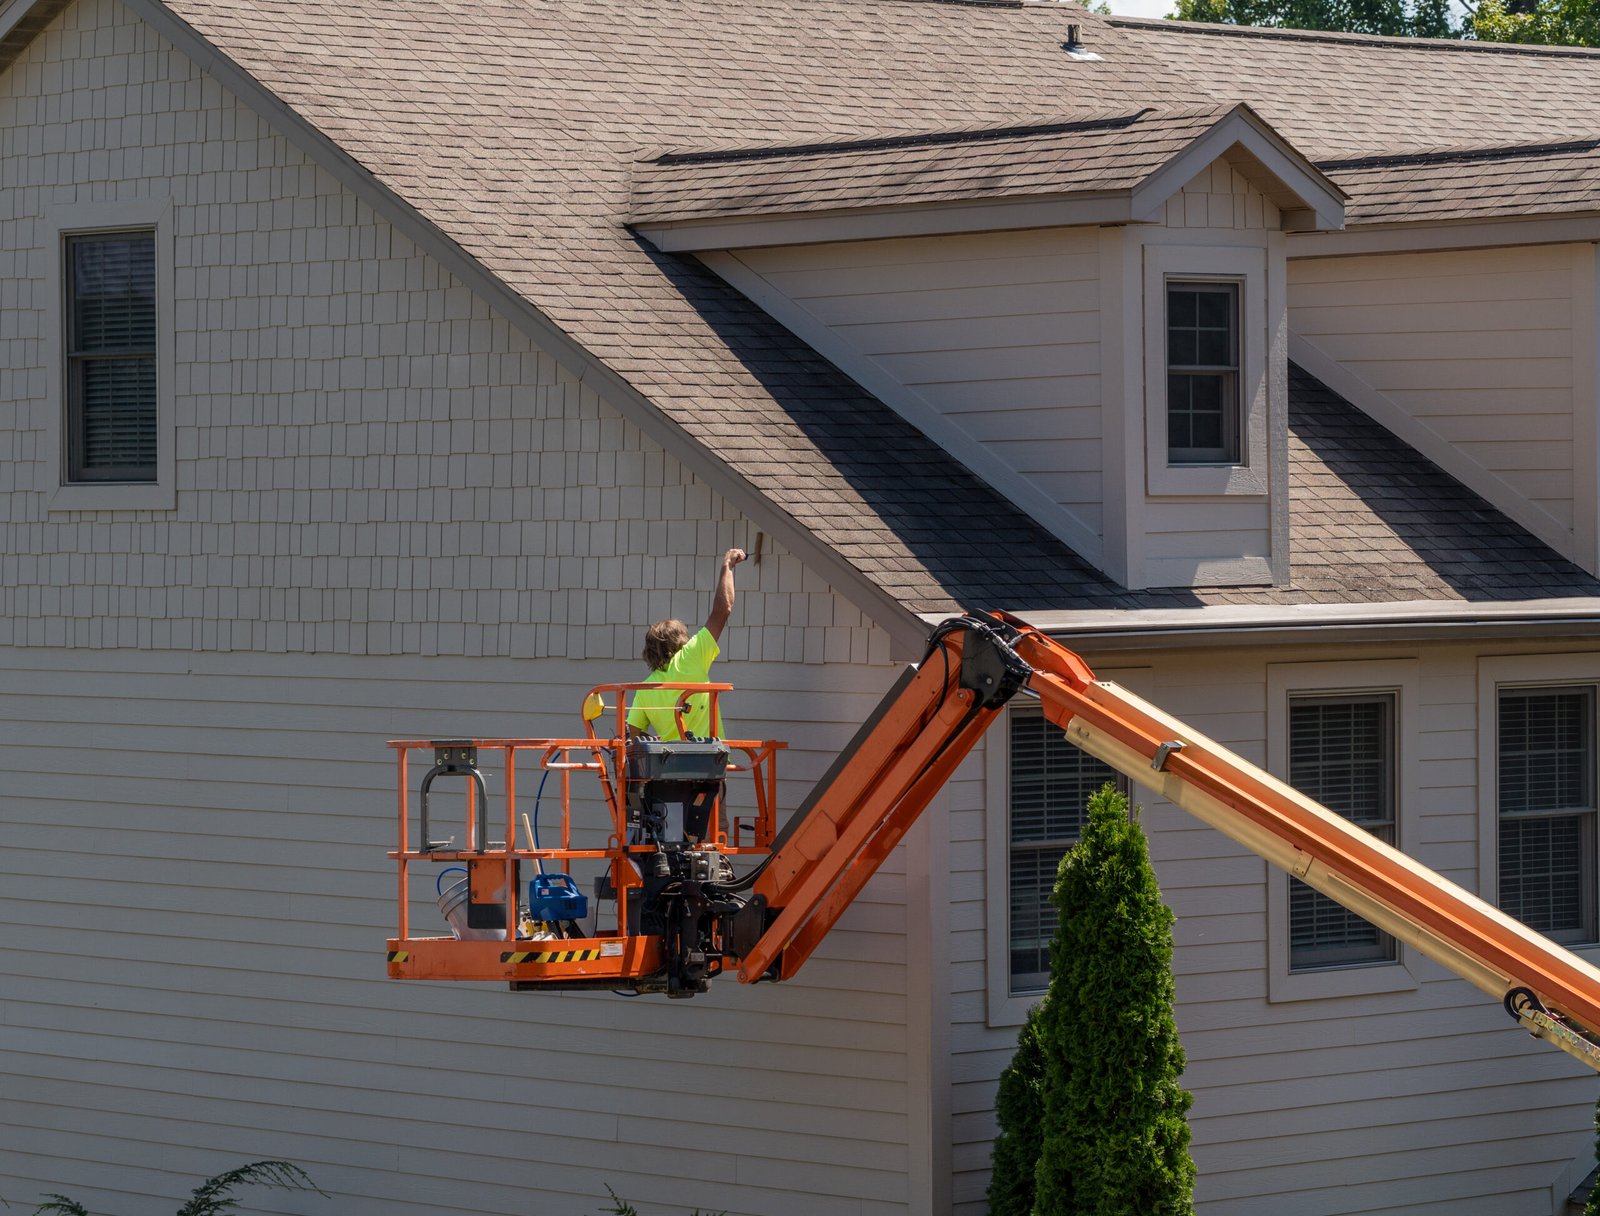 Professional painter on a lift painting the exterior siding of a house in Northern Kentucky. Pillar Painting & Contracting